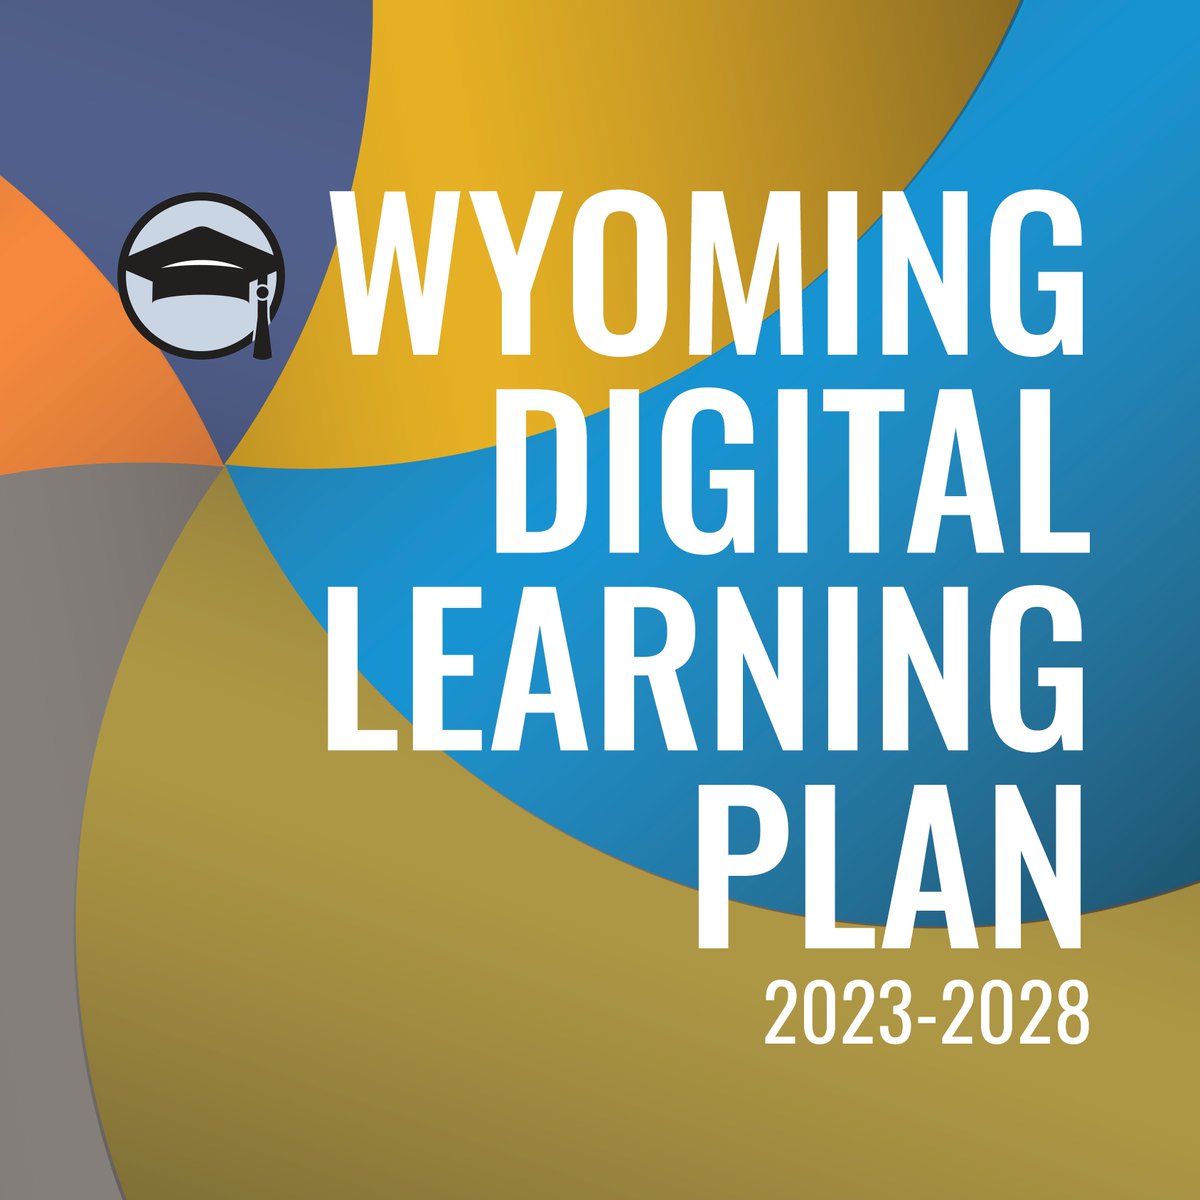 #WyDeptED's Digital Learning Plan ensures #Wyoming’s students have equitable access to opportunities at the forefront of #DigitalLearning to attain technology skills required for postsecondary success: edu.wyoming.gov/wp-content/upl… #WyDeptEd #WyoEdChat #DigitalLearning